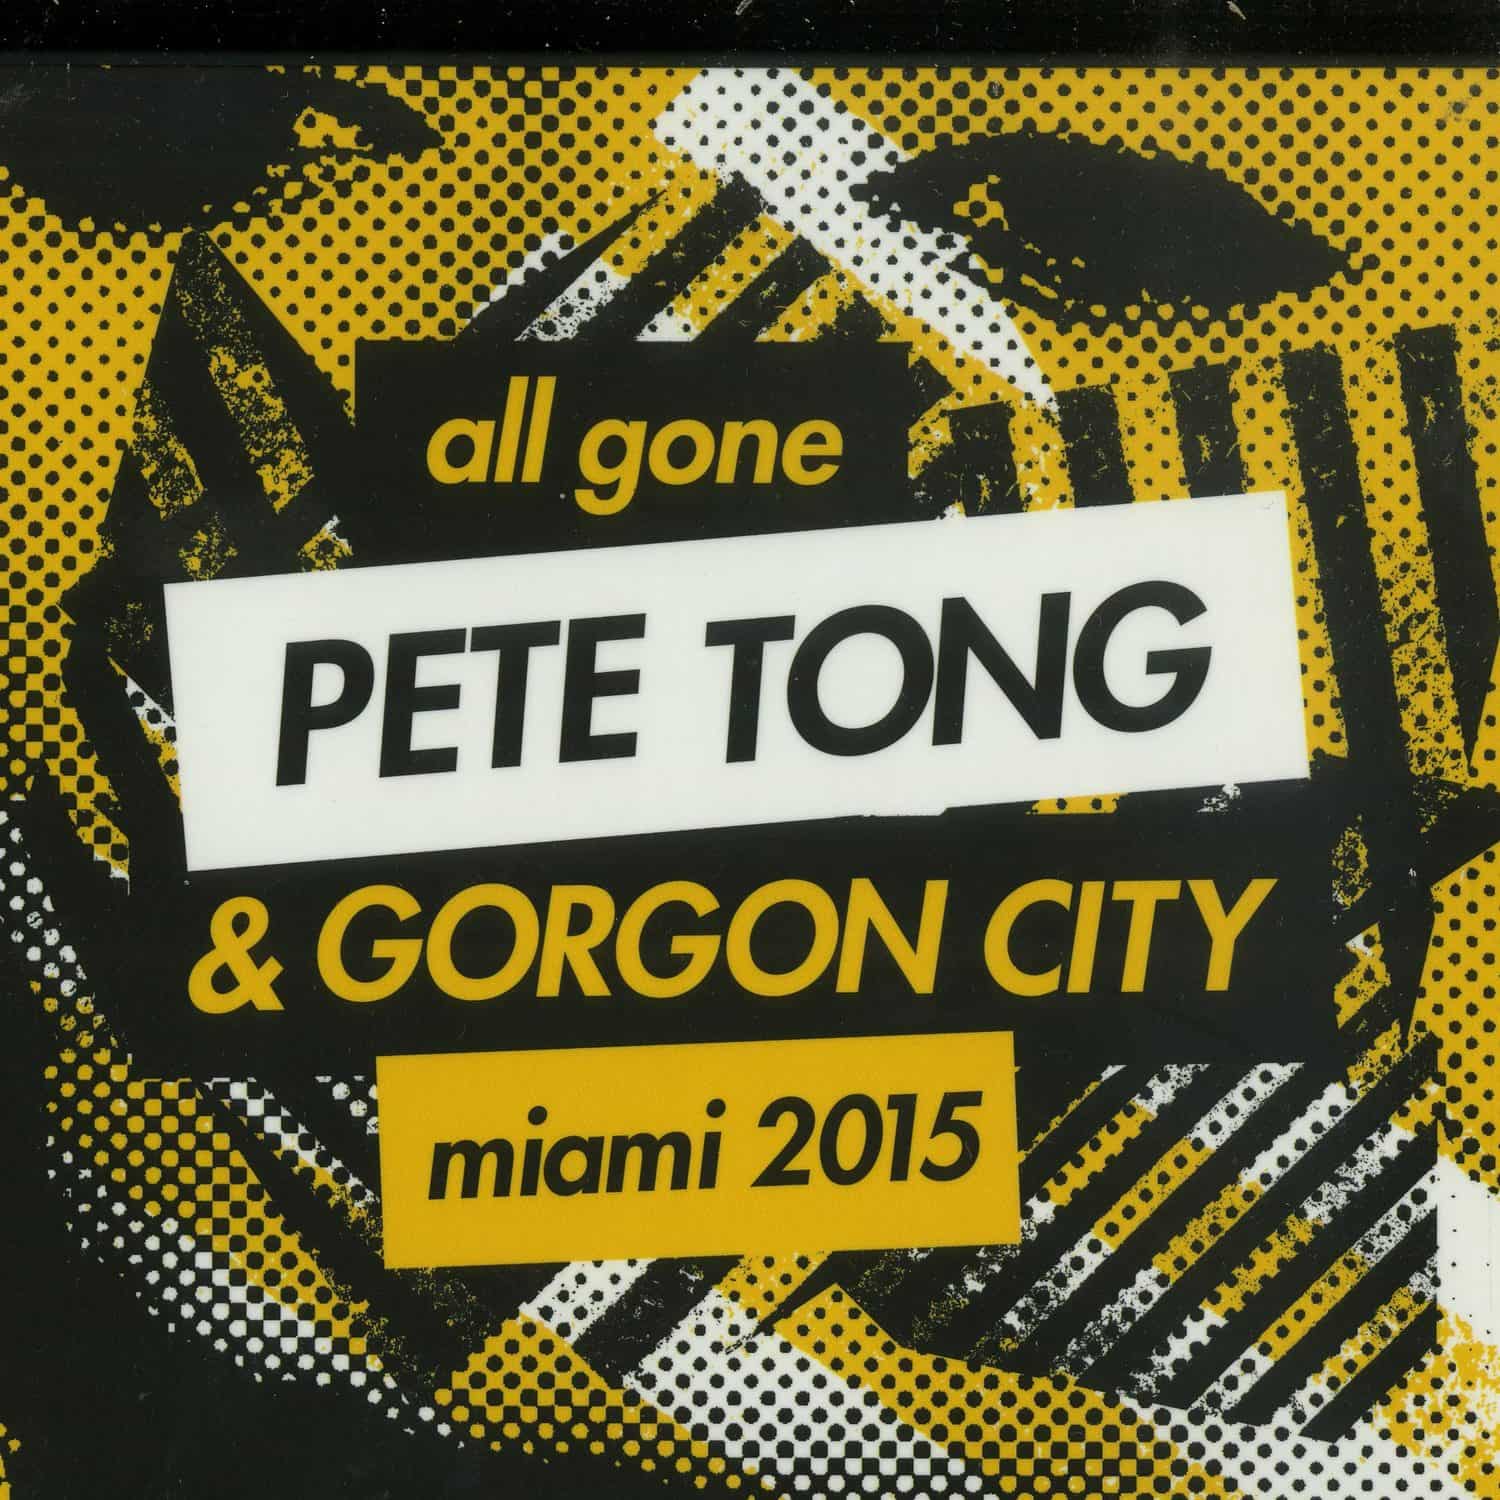 Various Artists - ALL GONE: PETE TONG & GORGON CITY 